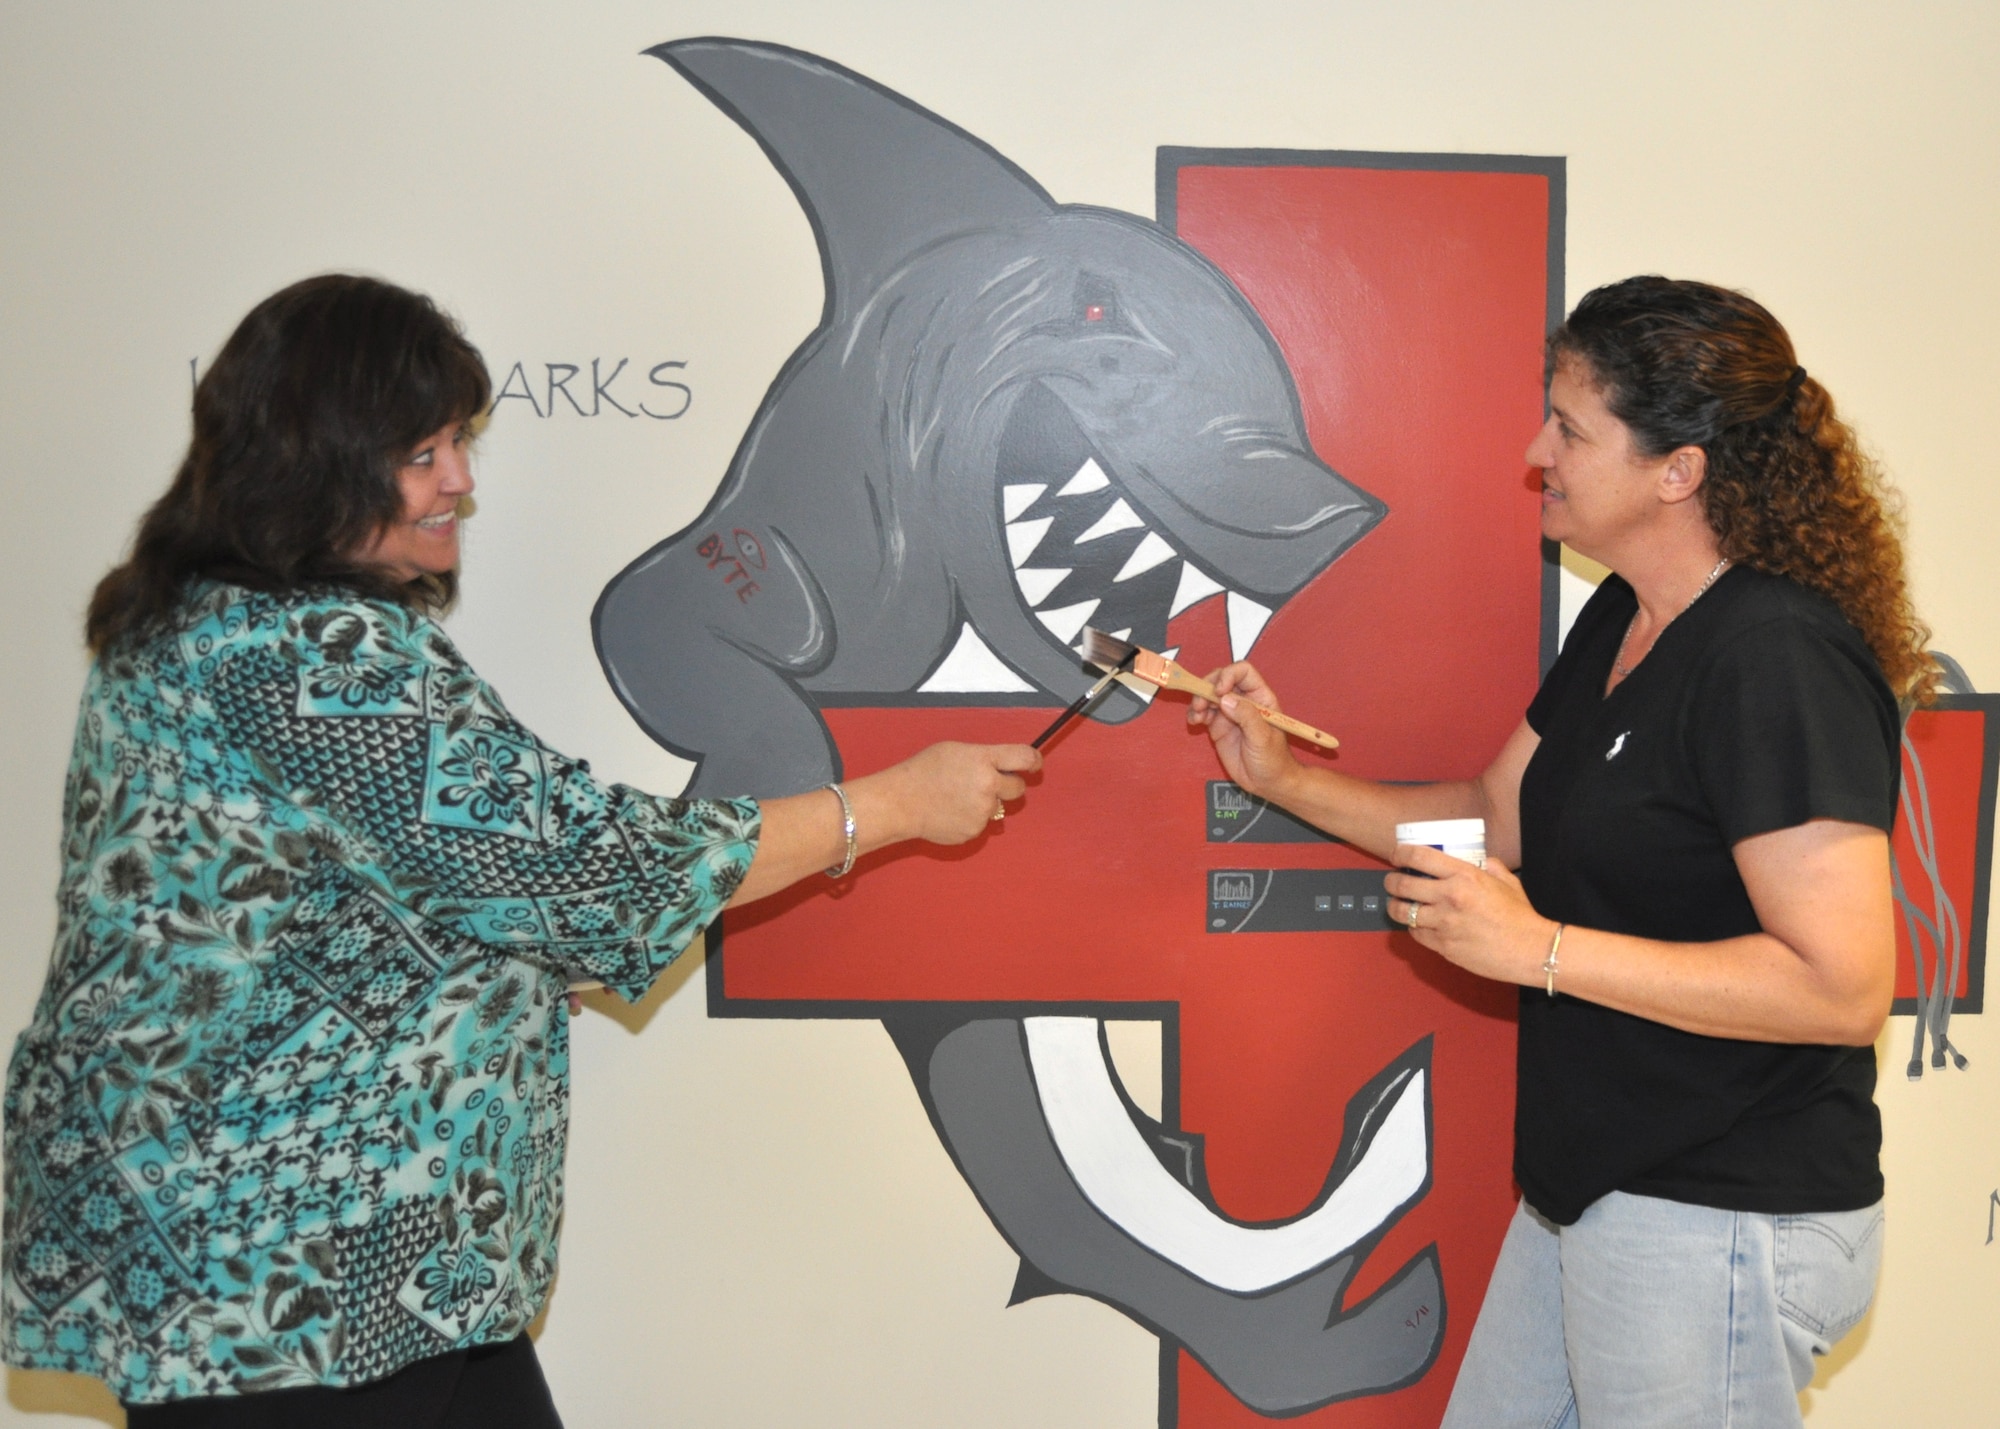 Tammy Raines, left, and Christine Roy, 81st Medical Support Squadron Medical information management flight, Keesler Air Force Base, Biloxi, Miss., cross paint brushes in front of the “LAN Shark” logo they created for the flight. They developed the mascot after flight commander Maj. Reginald Sennie suggested the unit could use something that might be incorporated into things like awards to enhance unit morale. They worked on the image over two non-training Fridays, completing it on Sept. 11, inscribing “9/11” within the shark’s tail. In addition to the words “LAN SHARK,” with LAN standing for “local area network,” the logo includes the term “NO LIMITS” — the letters “IMIT” representing “information management information technology.”  (U.S. Air Force photo by Steve Pivnick)